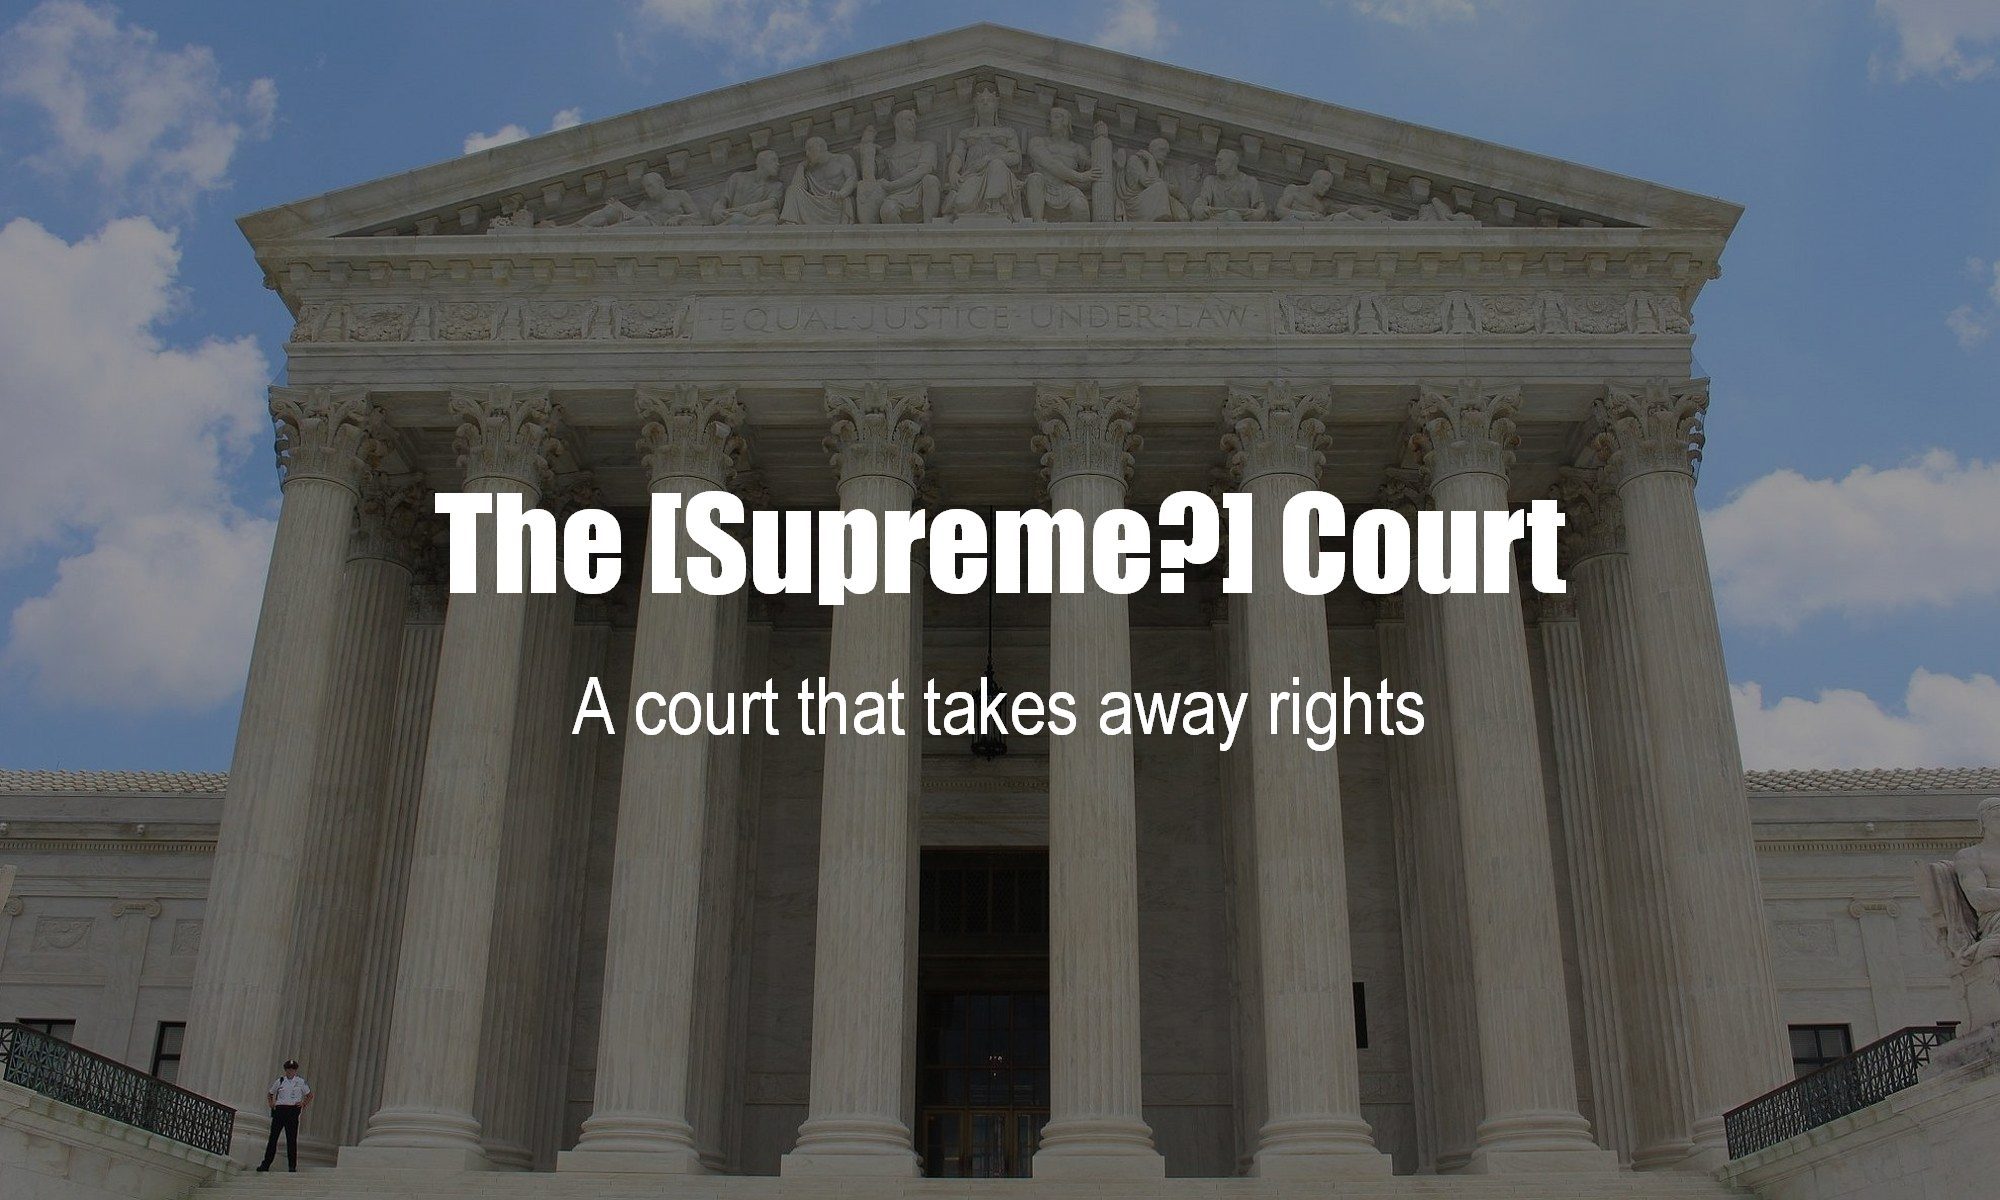 Why is the Supreme Court taking away my rights? What will they do next? What rights are going to be taken away by the Supreme Court?